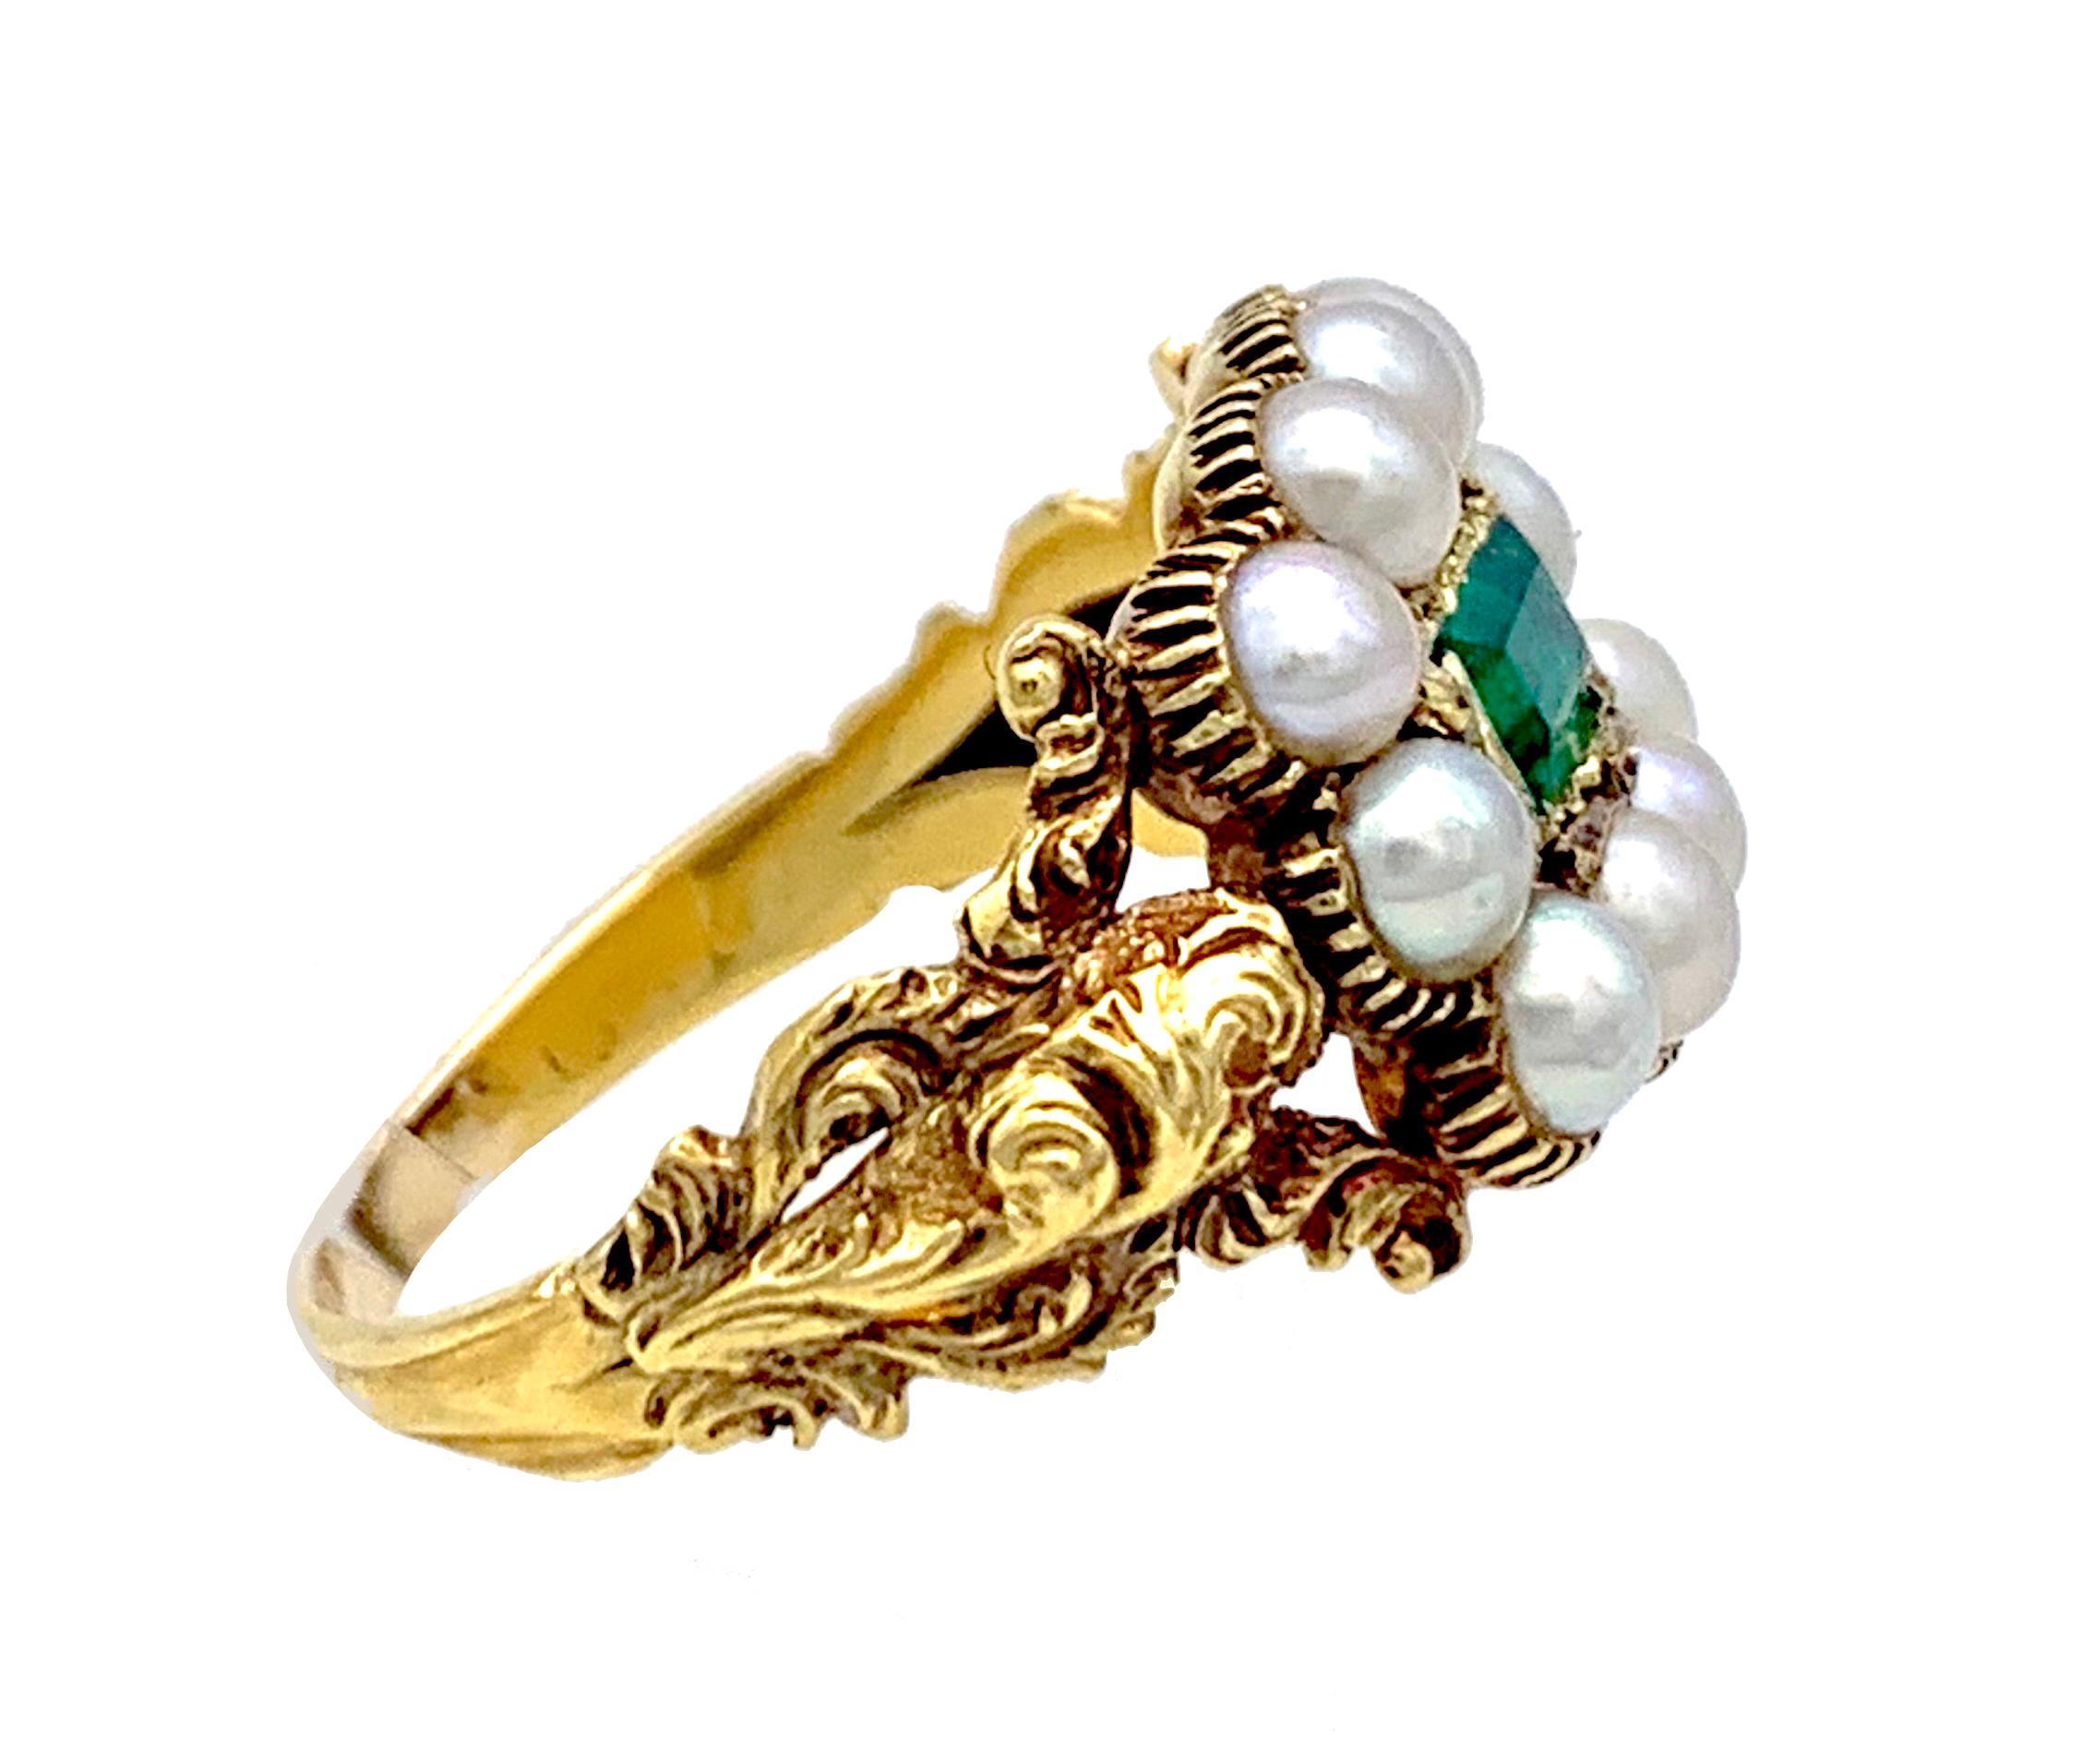 This bright Georgian was ceated in the 1820's. The ring is set with ten natural white oriental half pearls. The pearls are set in a grooved setting that follows the outline of the pearls. The center of the ring head is decorated with a rectangular